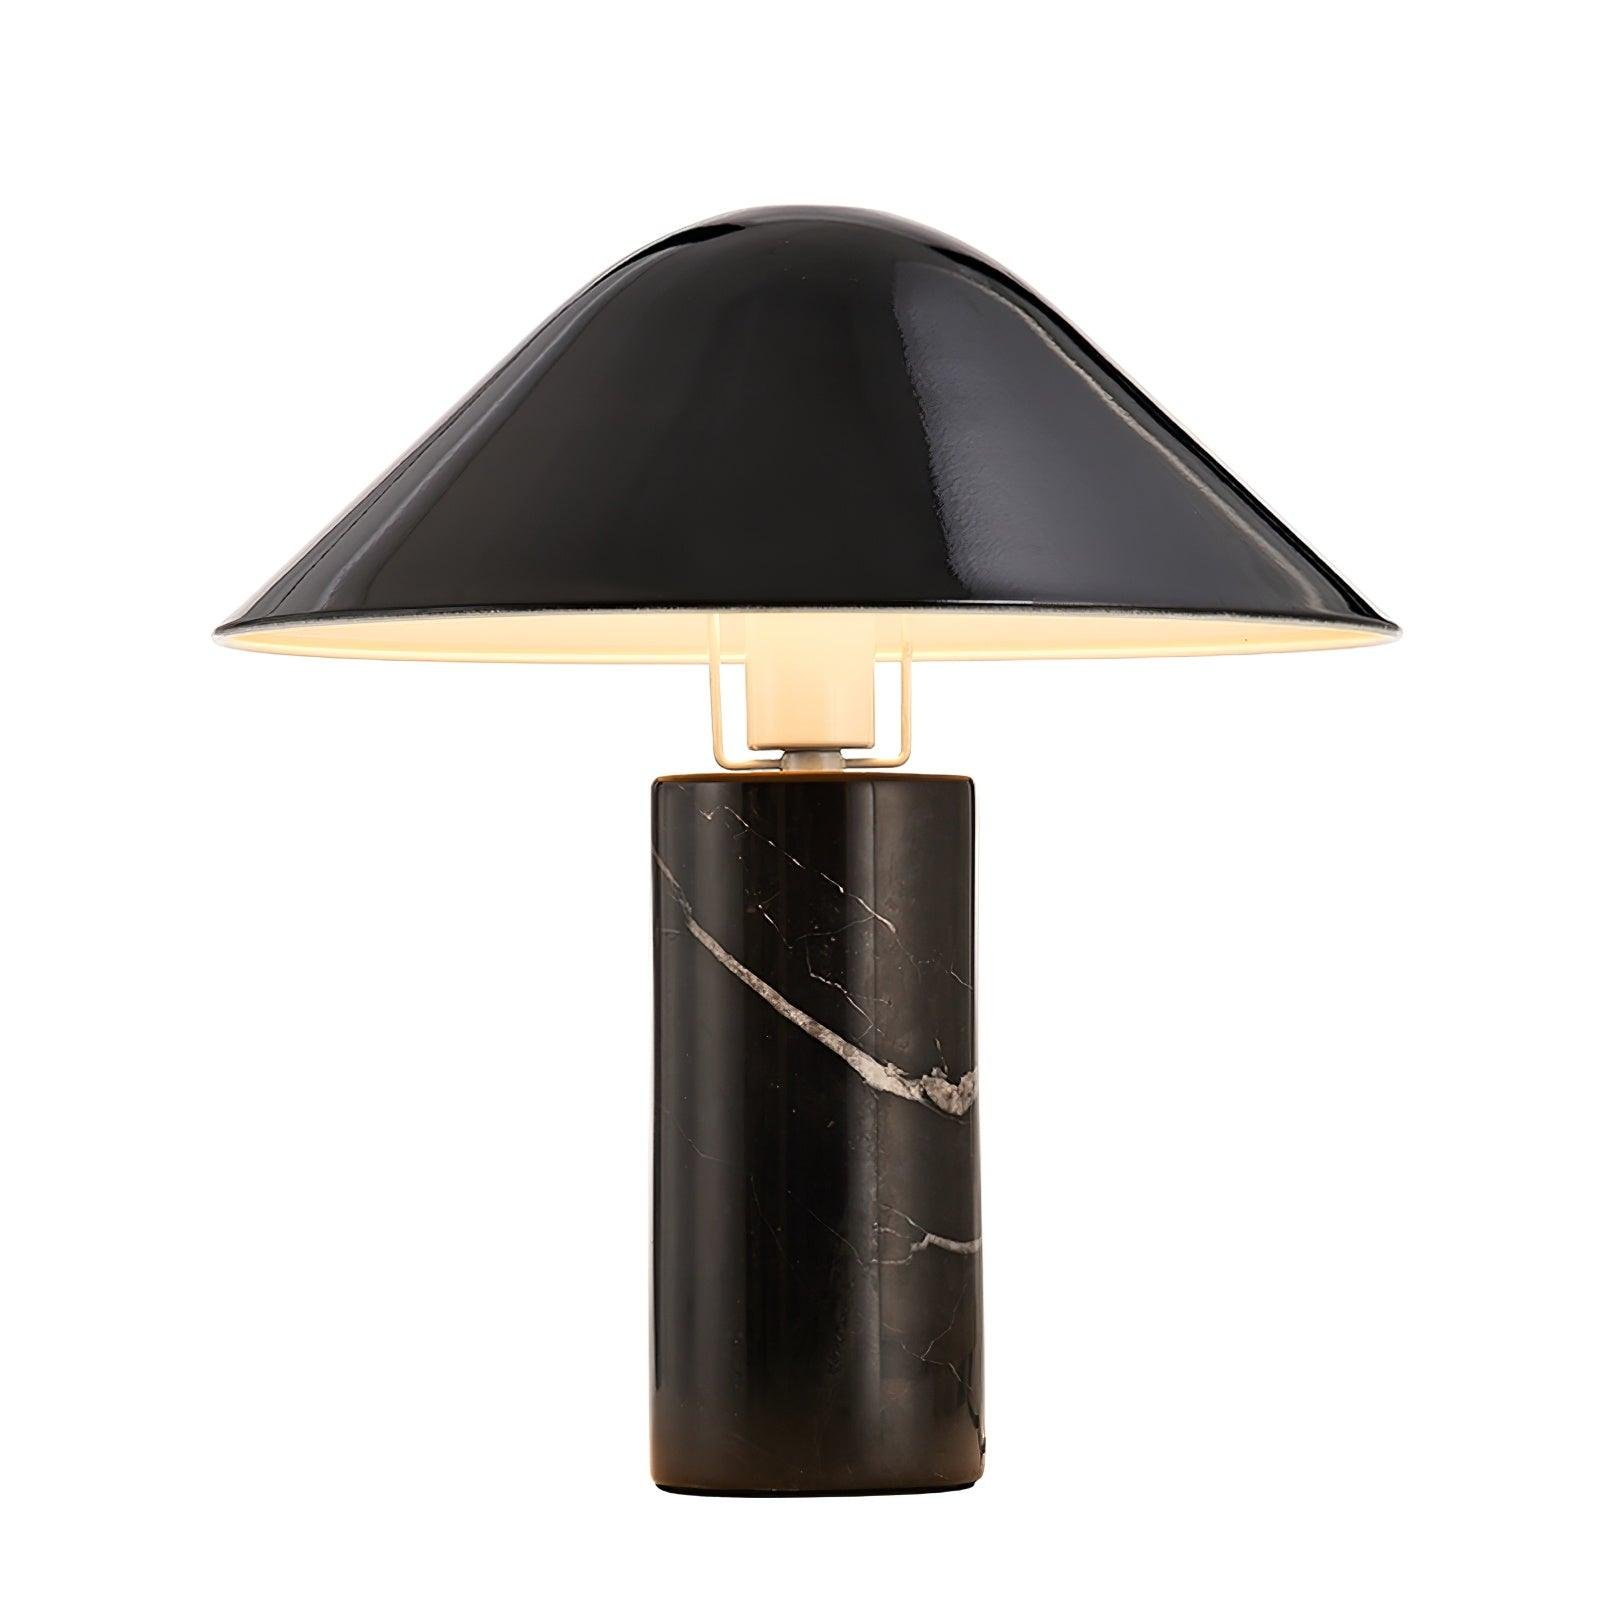 Black Adelaide Marble Table Lamp with EU plug, measuring 14.9" in diameter and 16.5" in height (38cm x 42cm in Dia).